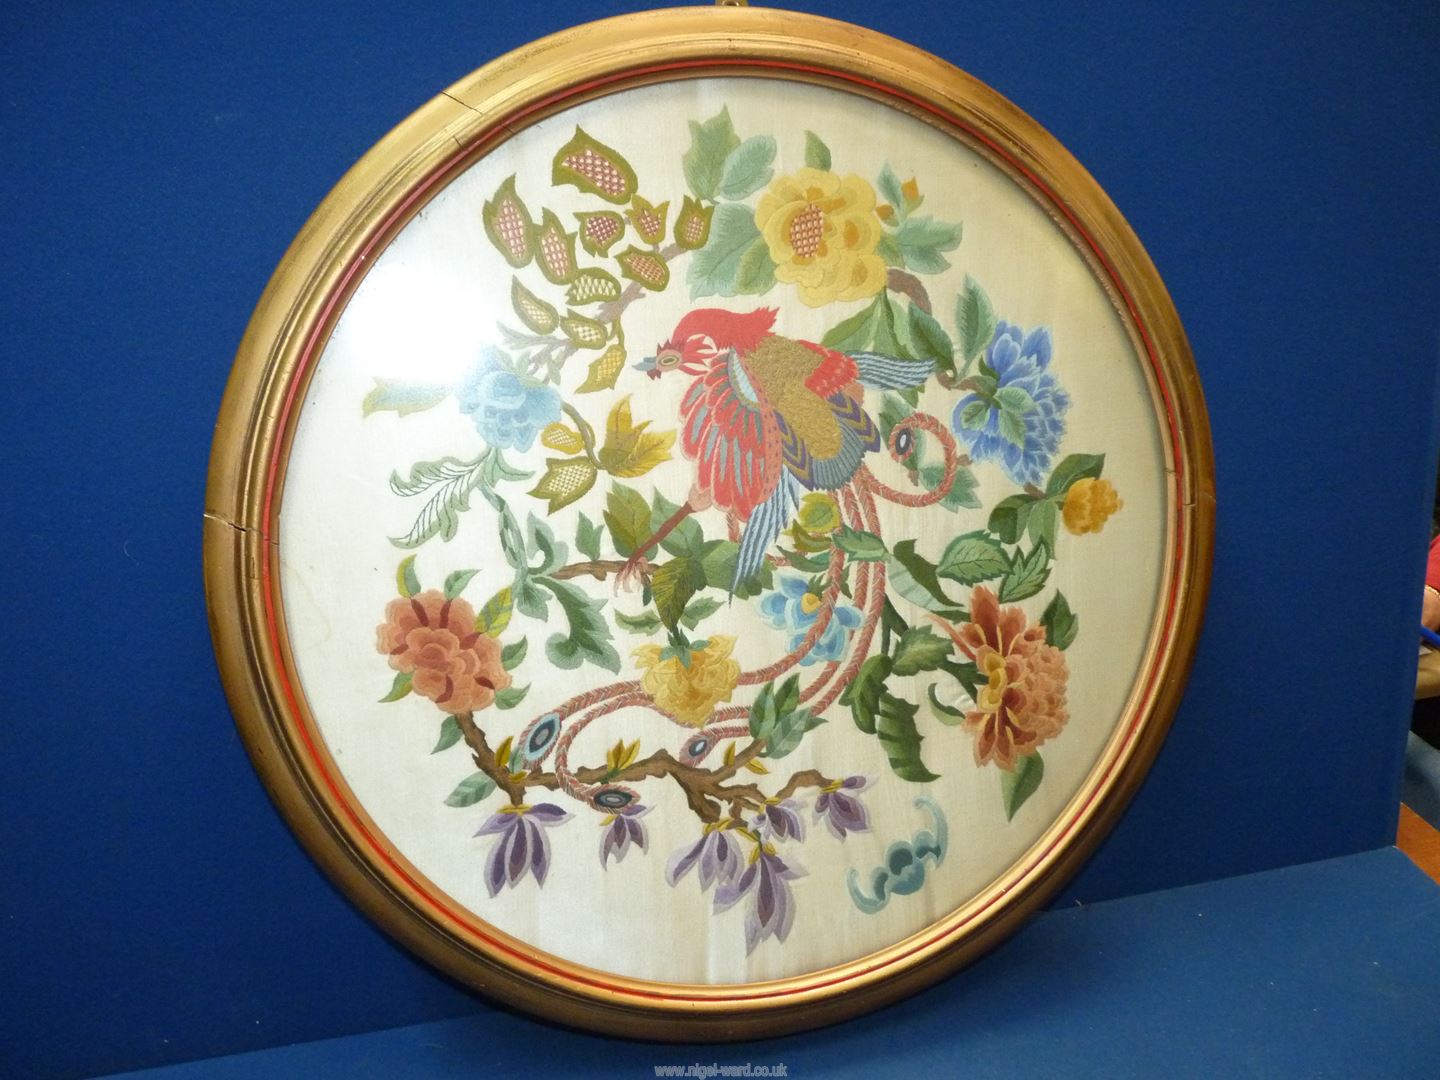 A circular framed Embroidery depicting Chinese style bird of paradise and flowers.